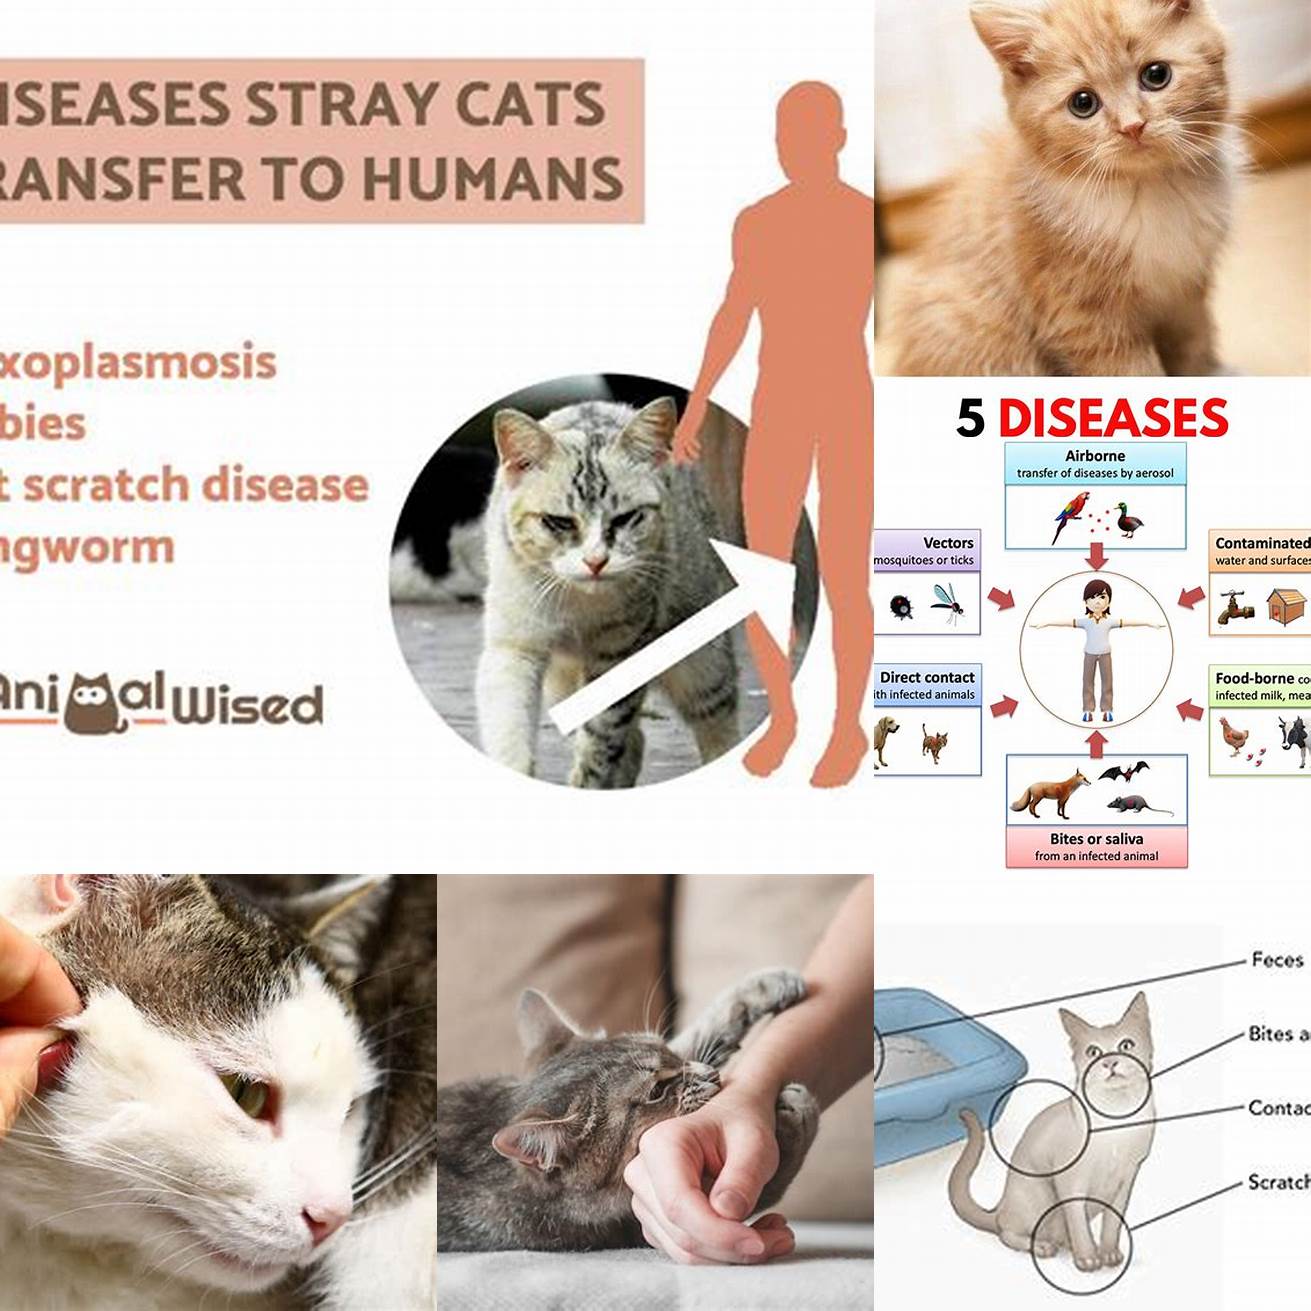 What diseases can cats transmit to humans